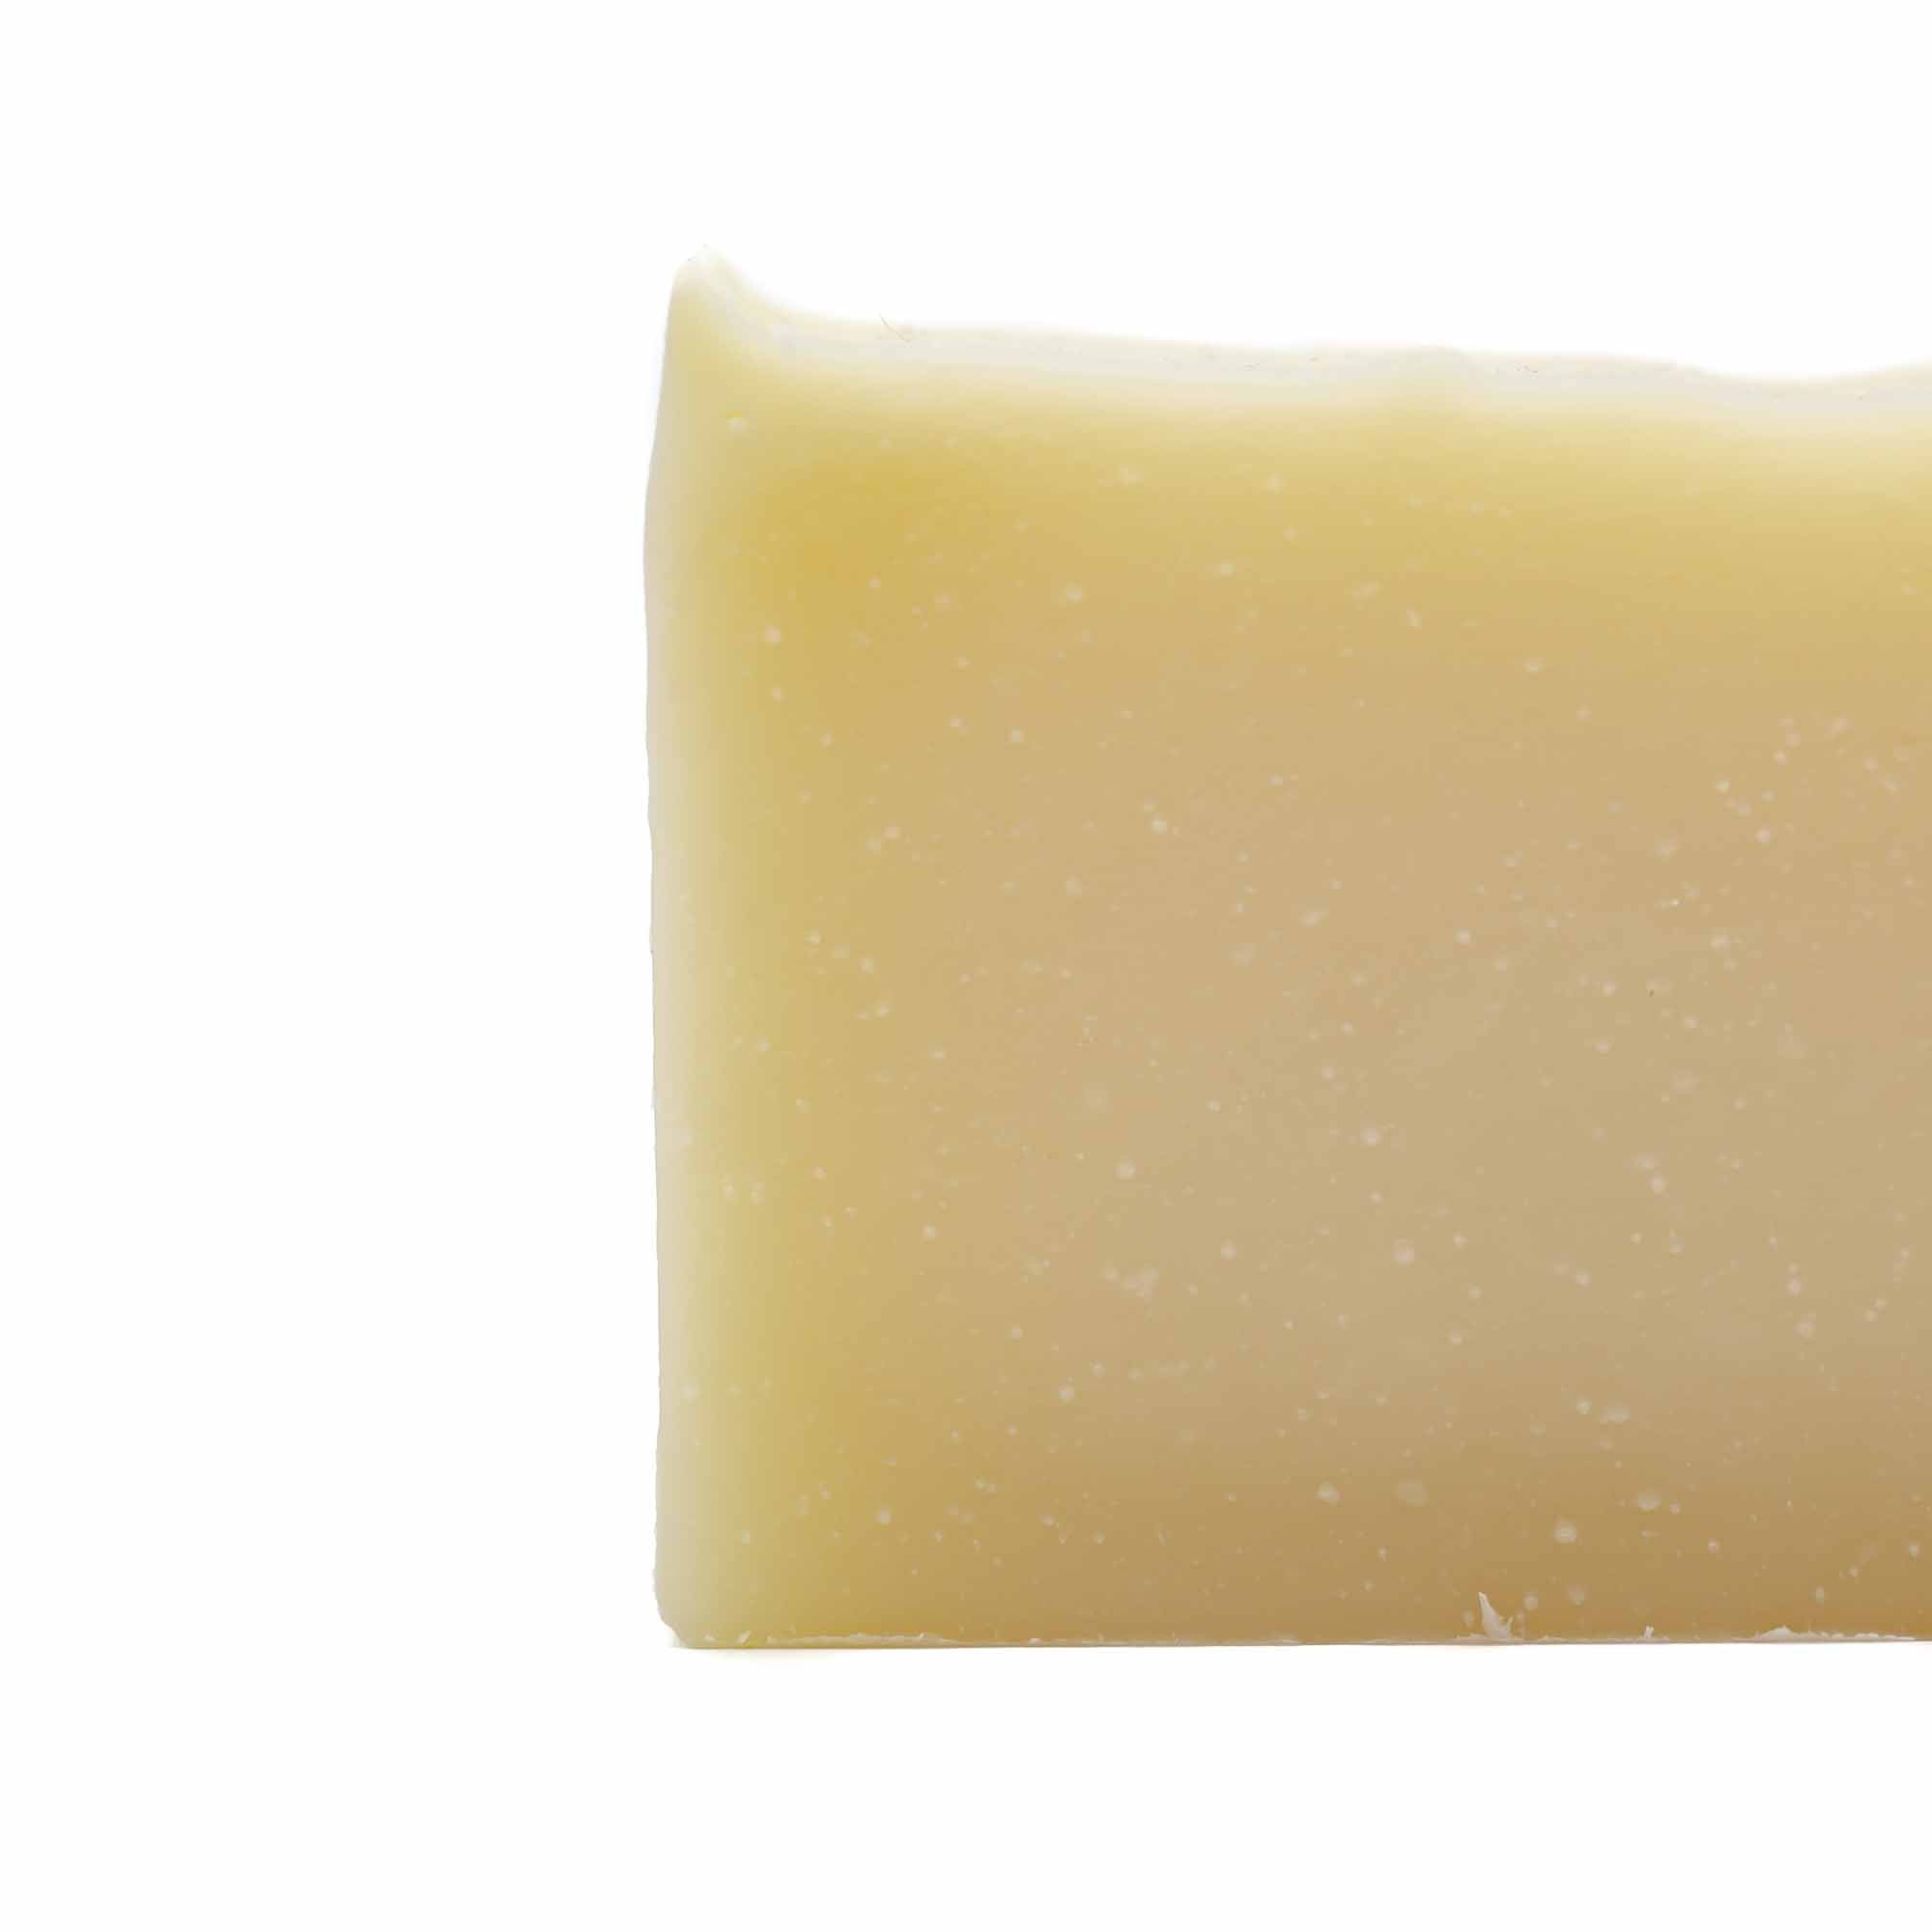 welliver goods - unscented bar soap - Mortise And Tenon